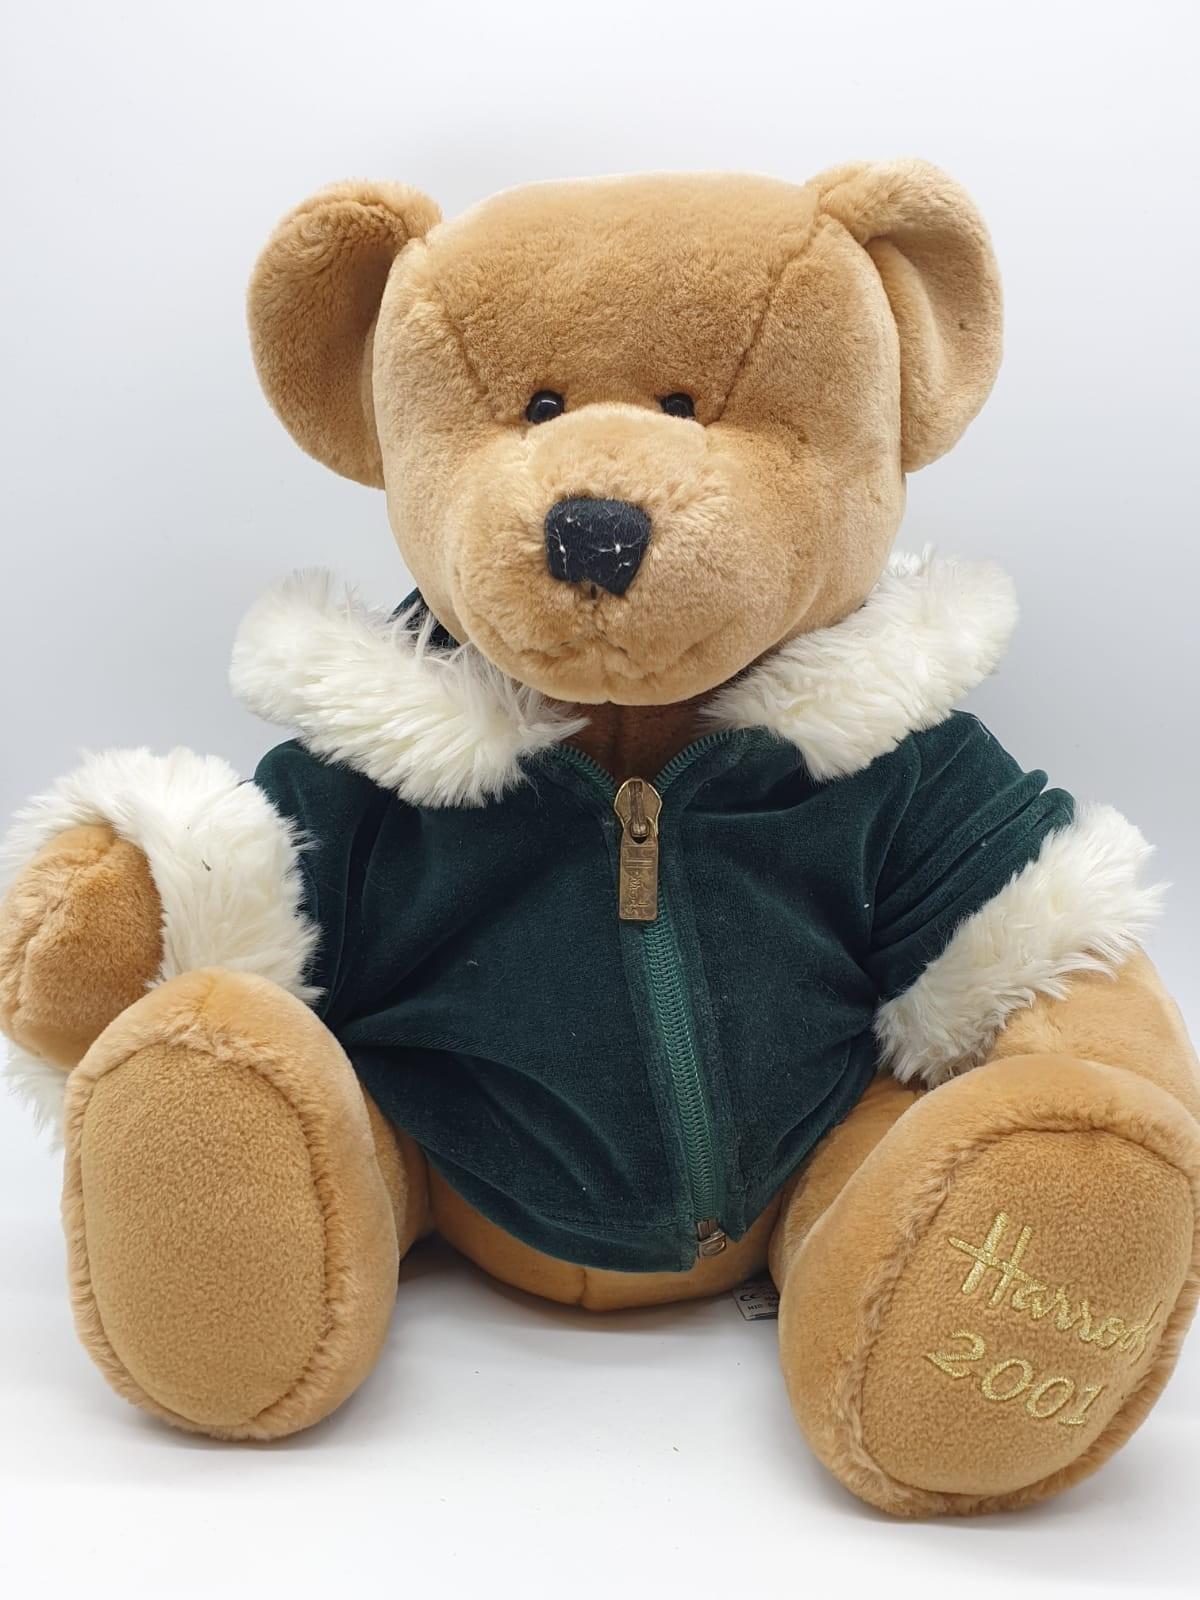 2 Harrods Teddy Bears 2001&2008 approx 40cms, very collectible - Image 4 of 21